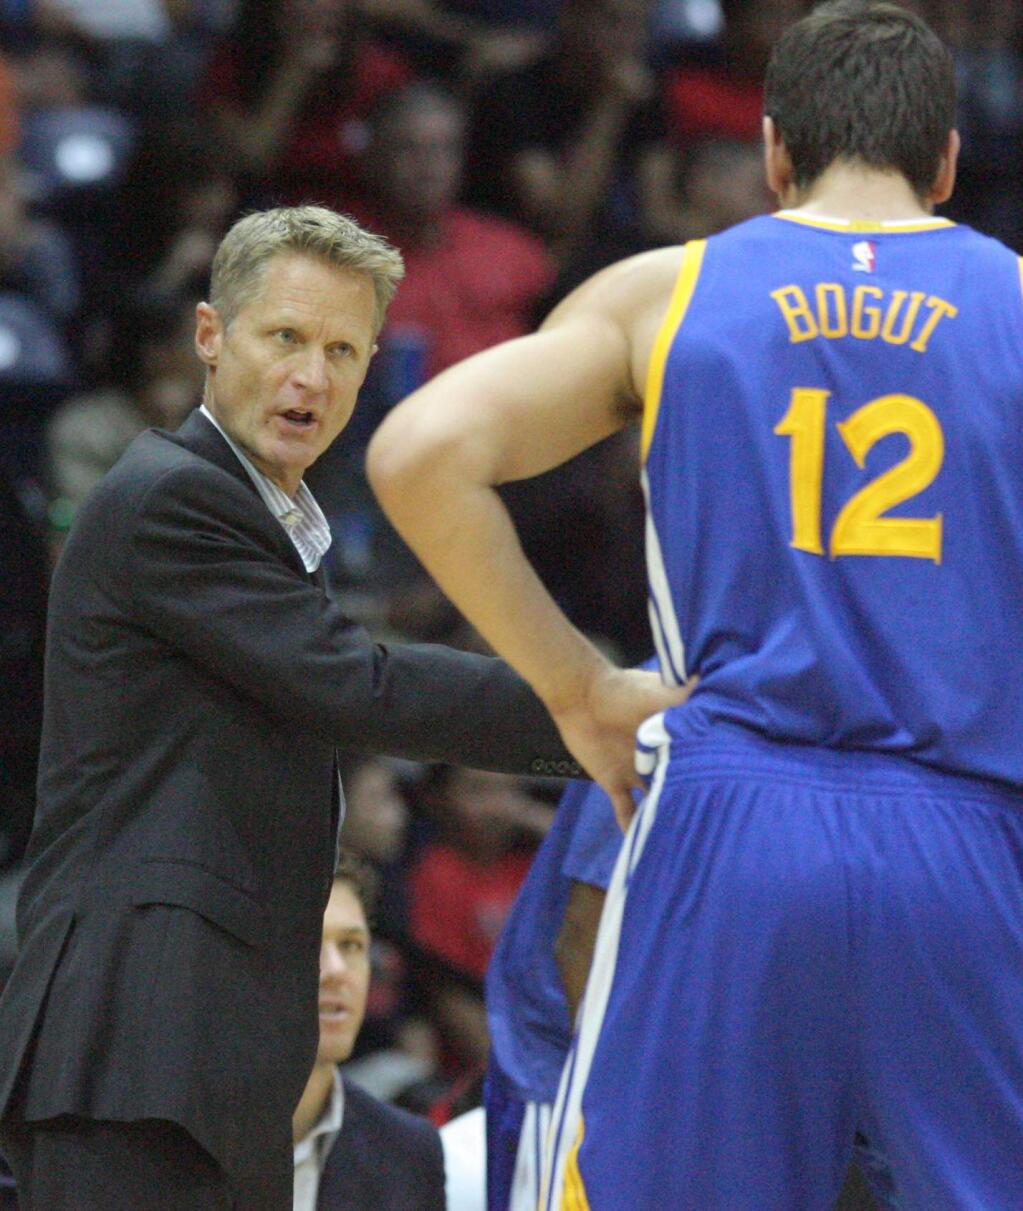 Golden State Warriors coach Steve Kerr, left, instructs Andrew Bogut during the second half of an NBA preseason basketball game in Hidalgo, Texas, Sunday, Oct. 19, 2014. (AP Photo/Delcia Lopez)